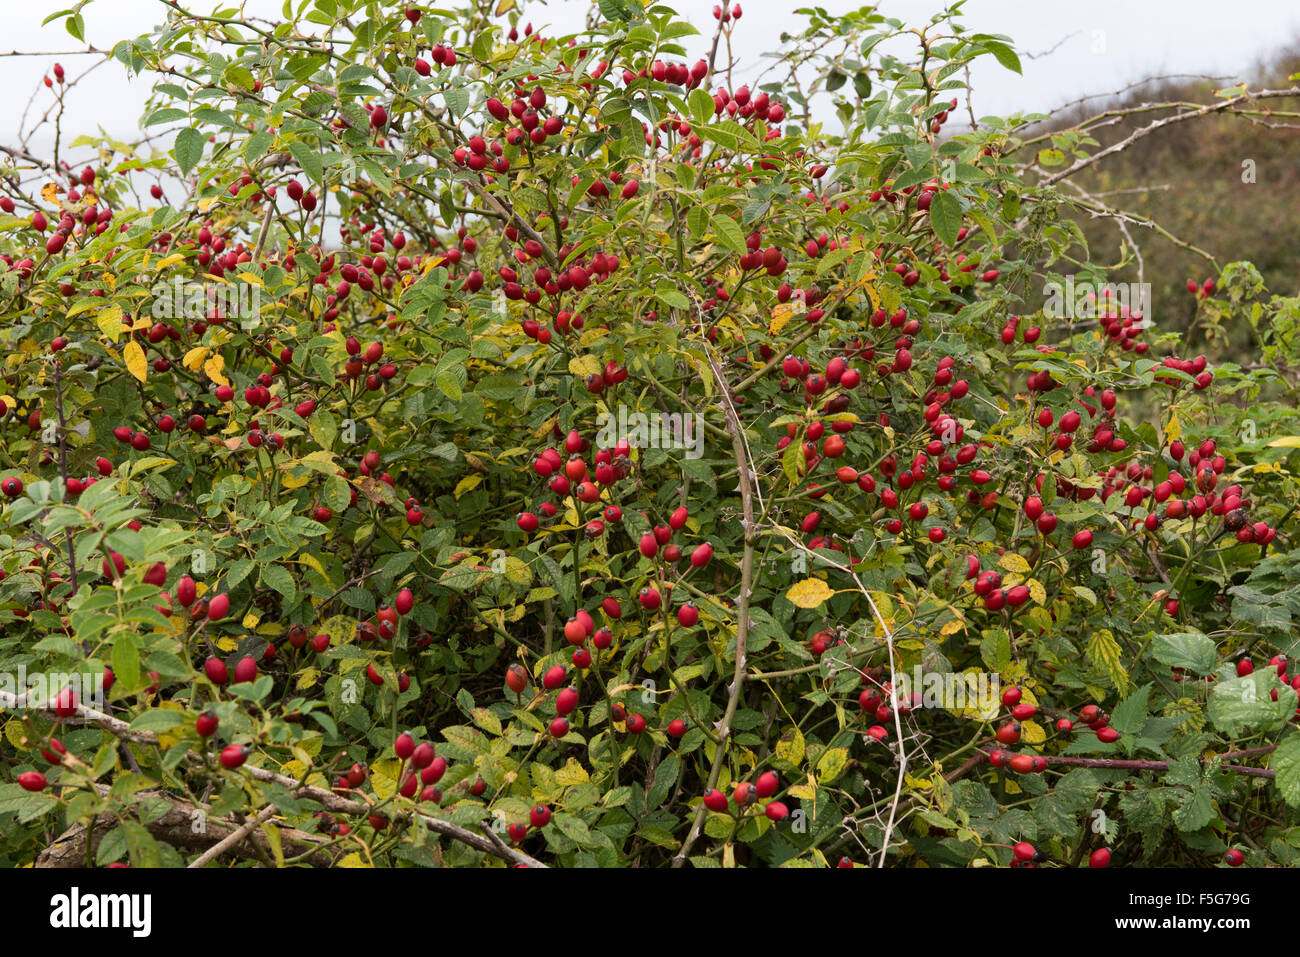 Ripe red hips of a dog rose, Rosa canina, on the Dorset coast in autumn, October Stock Photo